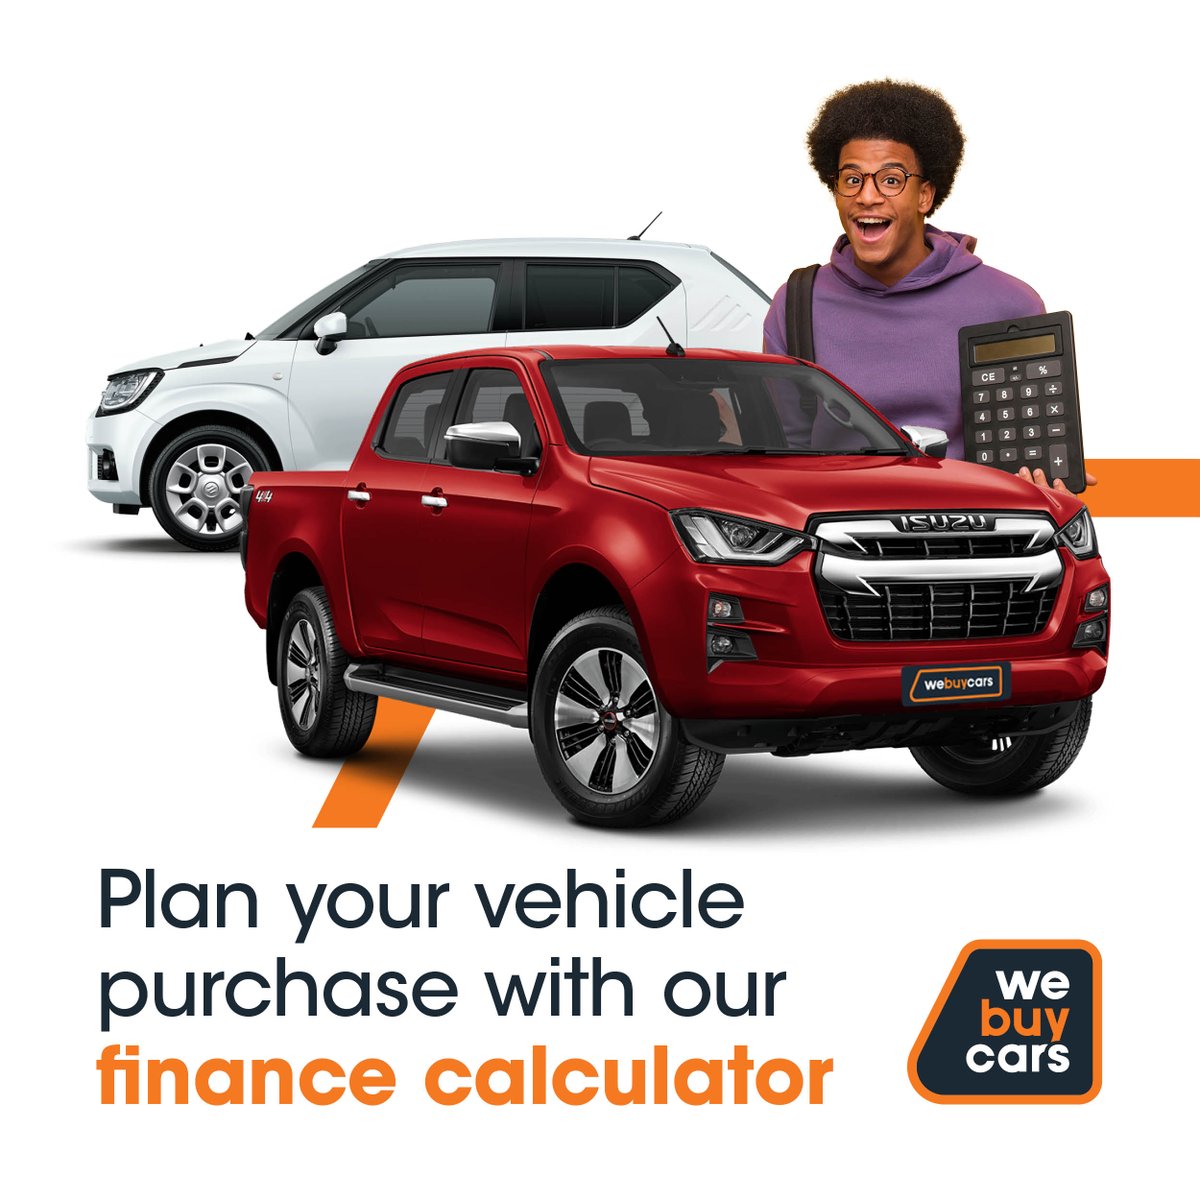 Try our finance calculator and make sure your vehicle purchase fits your budget. Shop hundreds of vehicles that suit your wallet. 🤓 #WeBuyCars